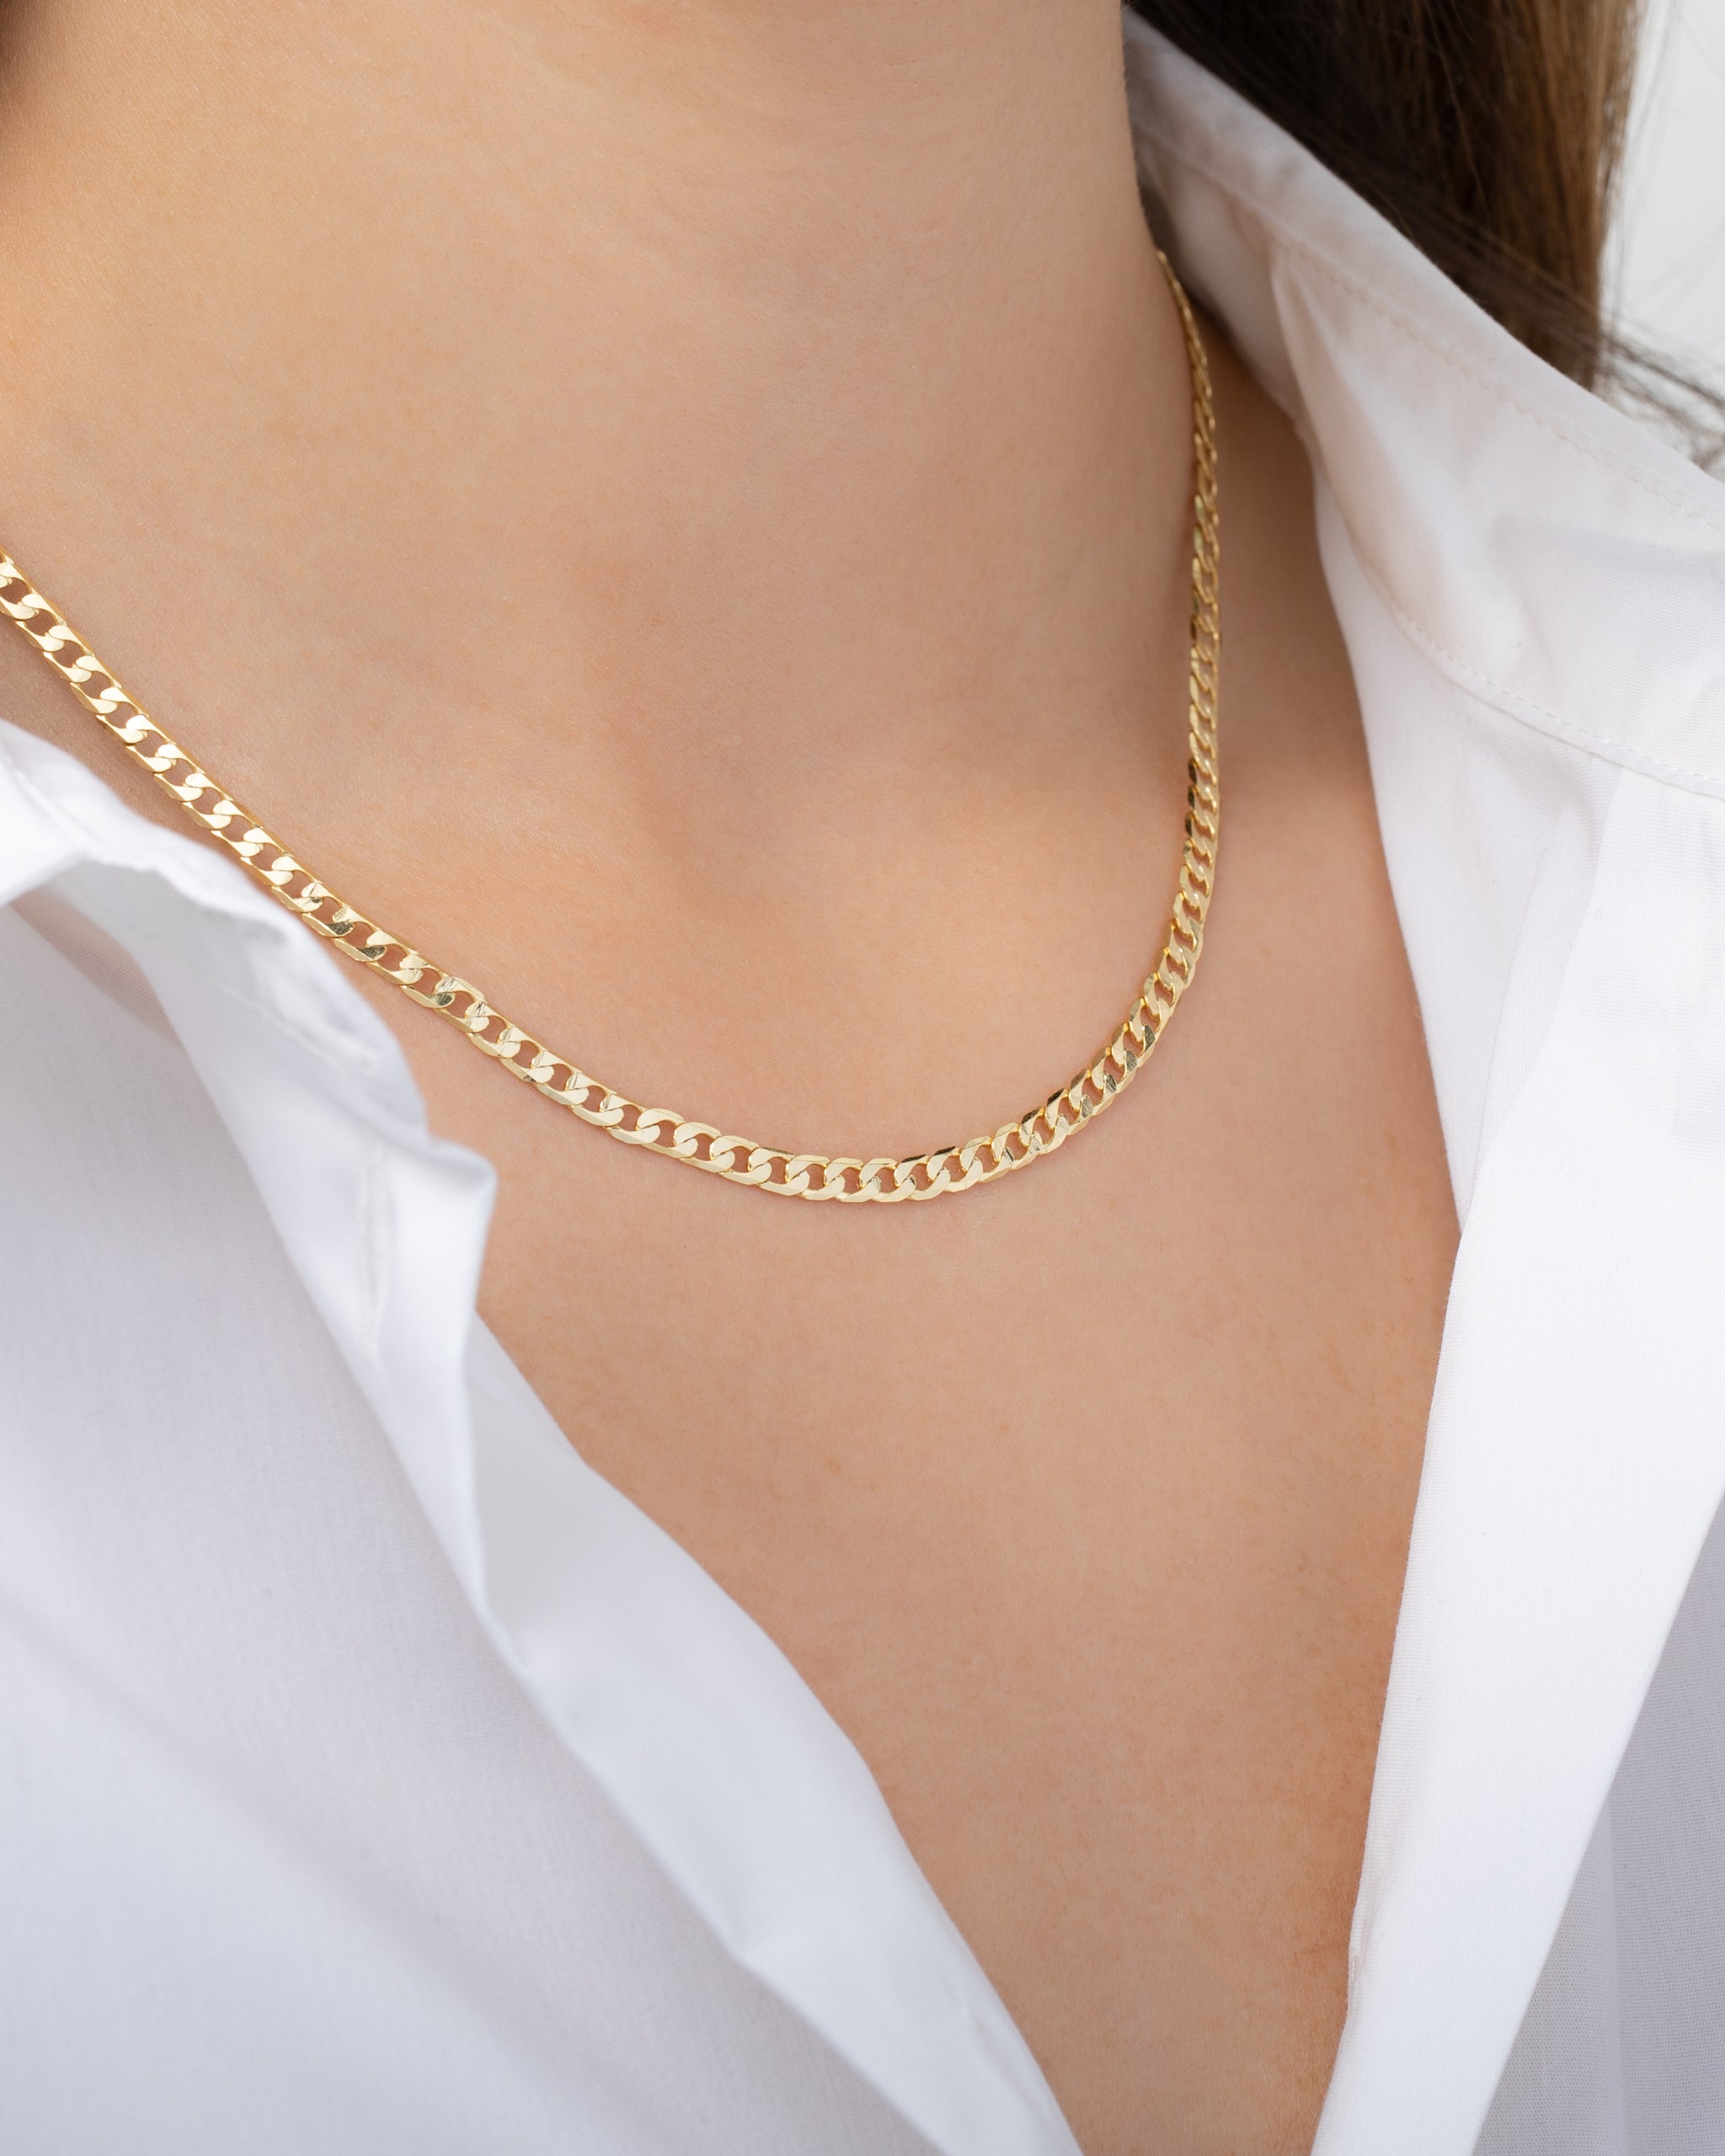 BY THE SEA COIN NECKLACE (18K GOLD VERMEIL) – KIRSTIN ASH (New Zealand)